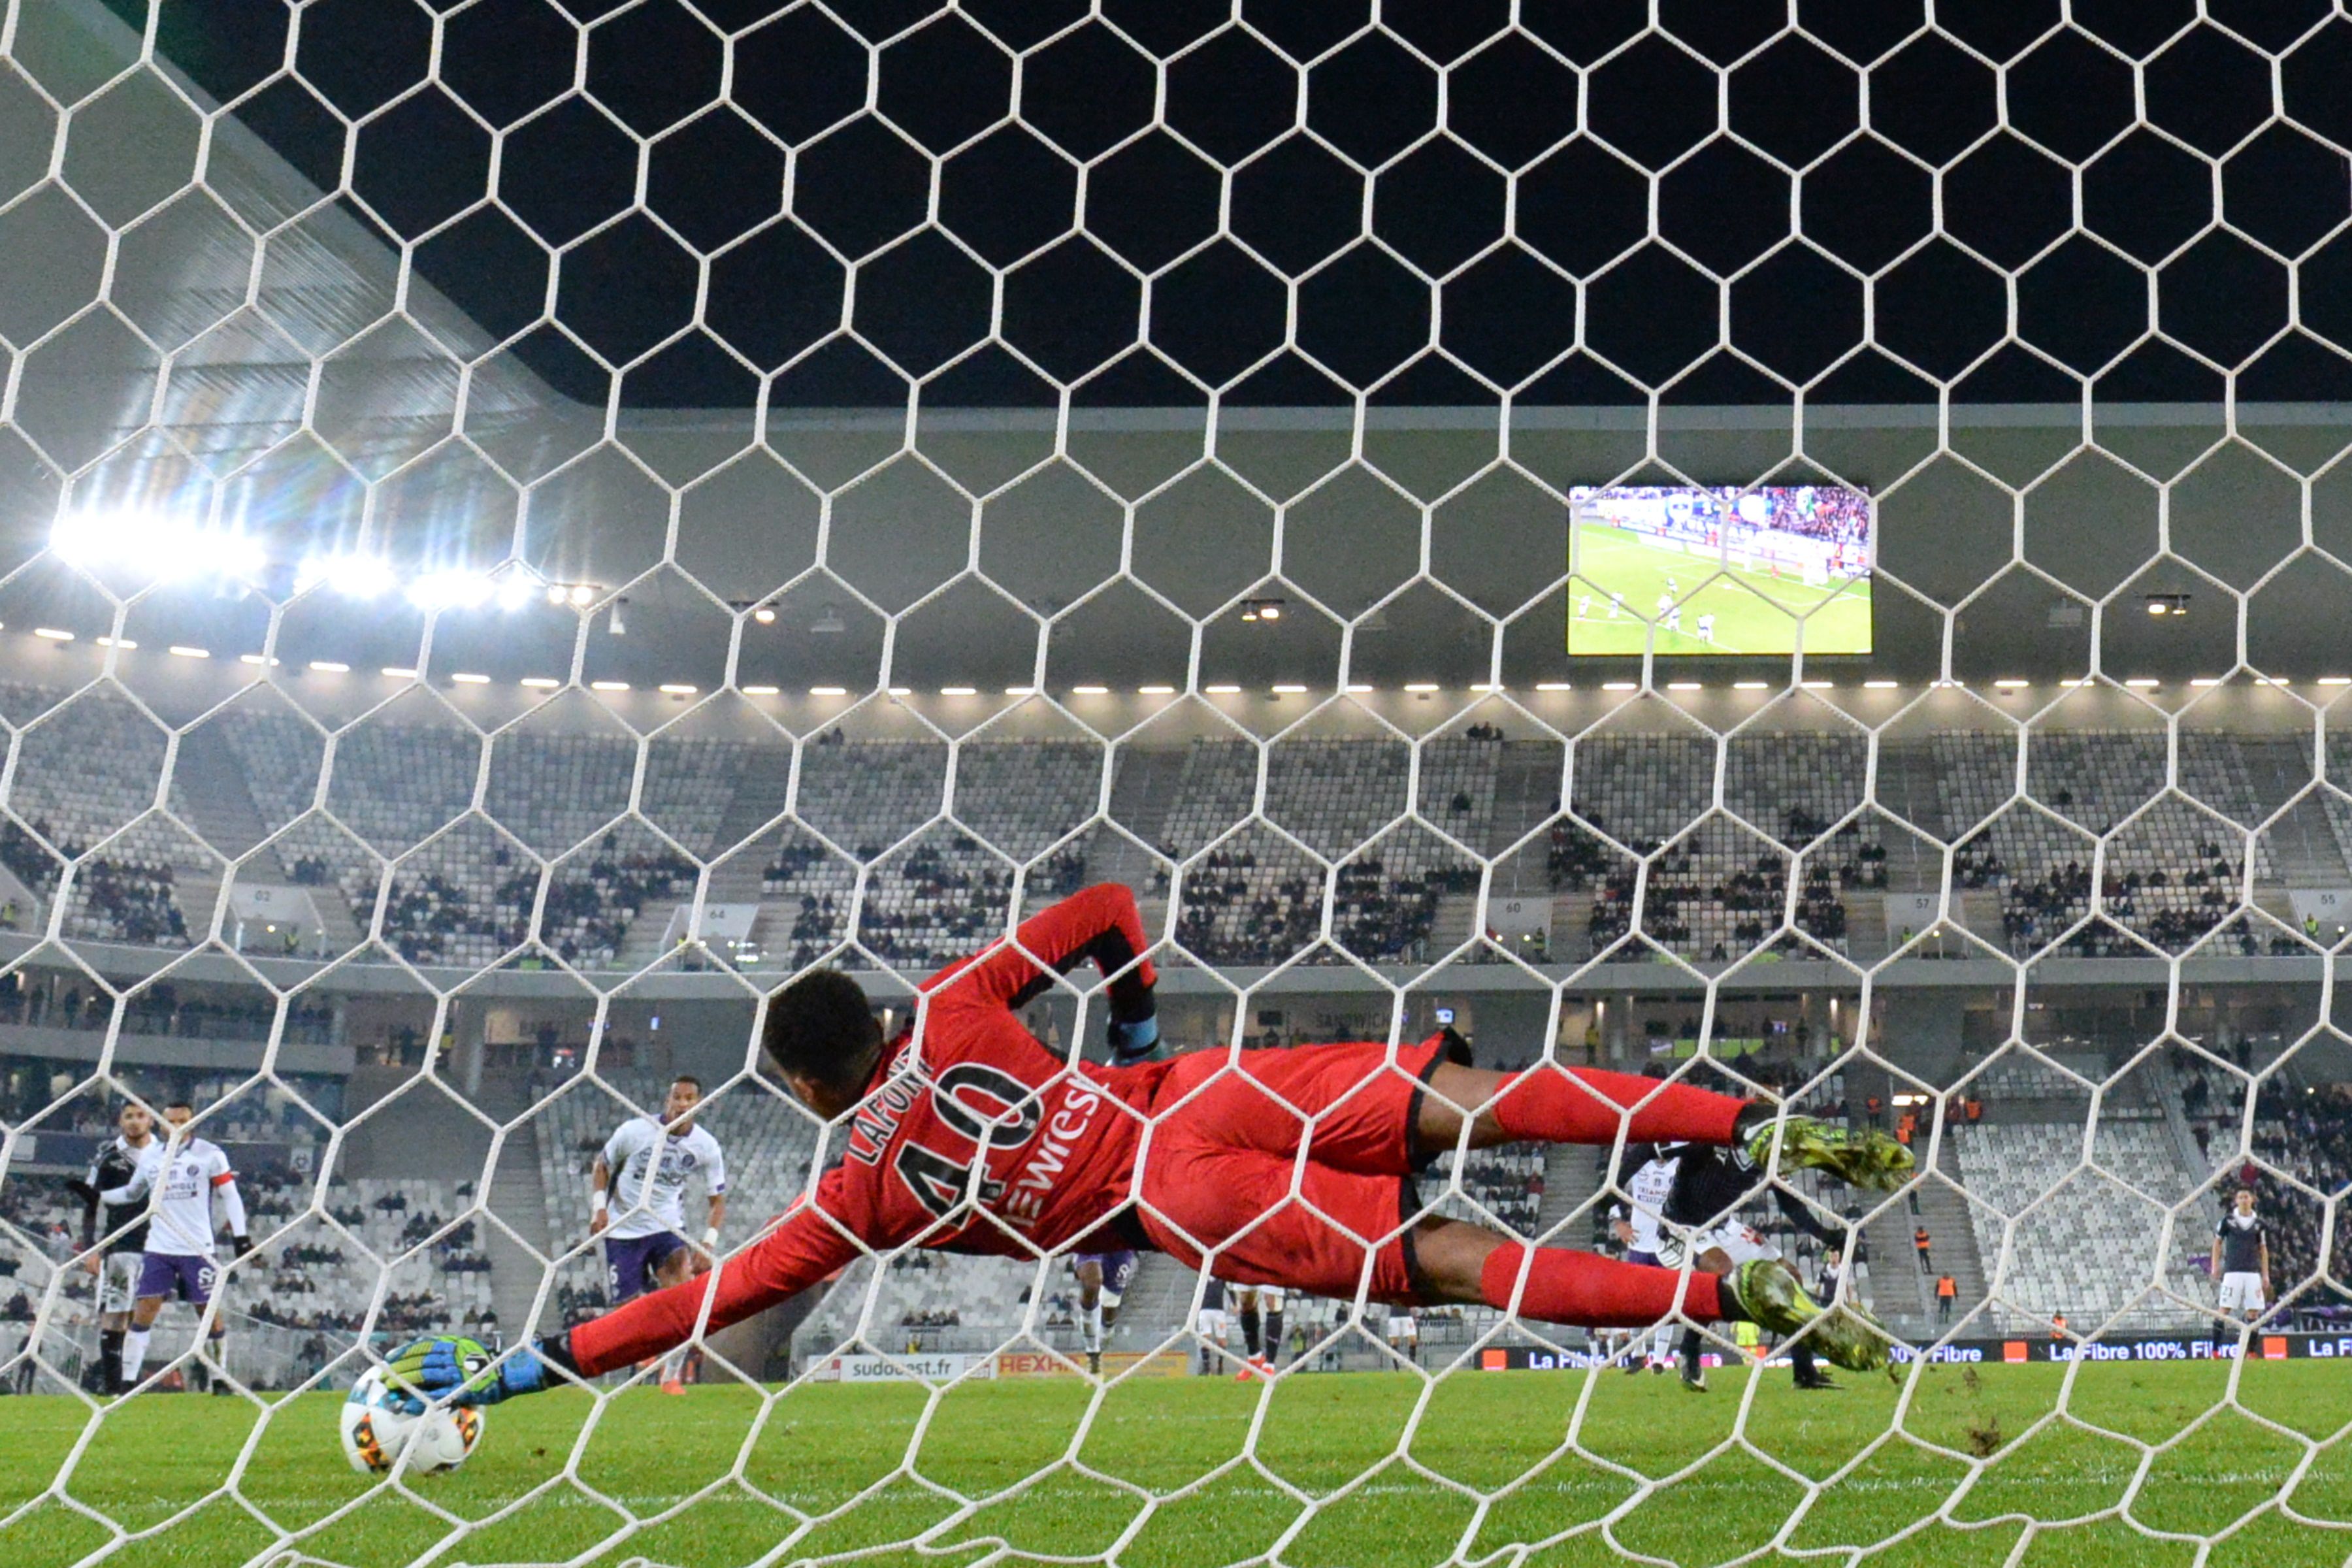 TOPSHOT - Toulouse's French goalkeeper Alban Lafont stops a penalty during the French L1 football match between Bordeaux (FCGB) and Toulouse (TFC) on January 21, 2017, at the Matmut Atlantique stadium in Bordeaux, southwestern France. / AFP / NICOLAS TUCAT        (Photo credit should read NICOLAS TUCAT/AFP/Getty Images)